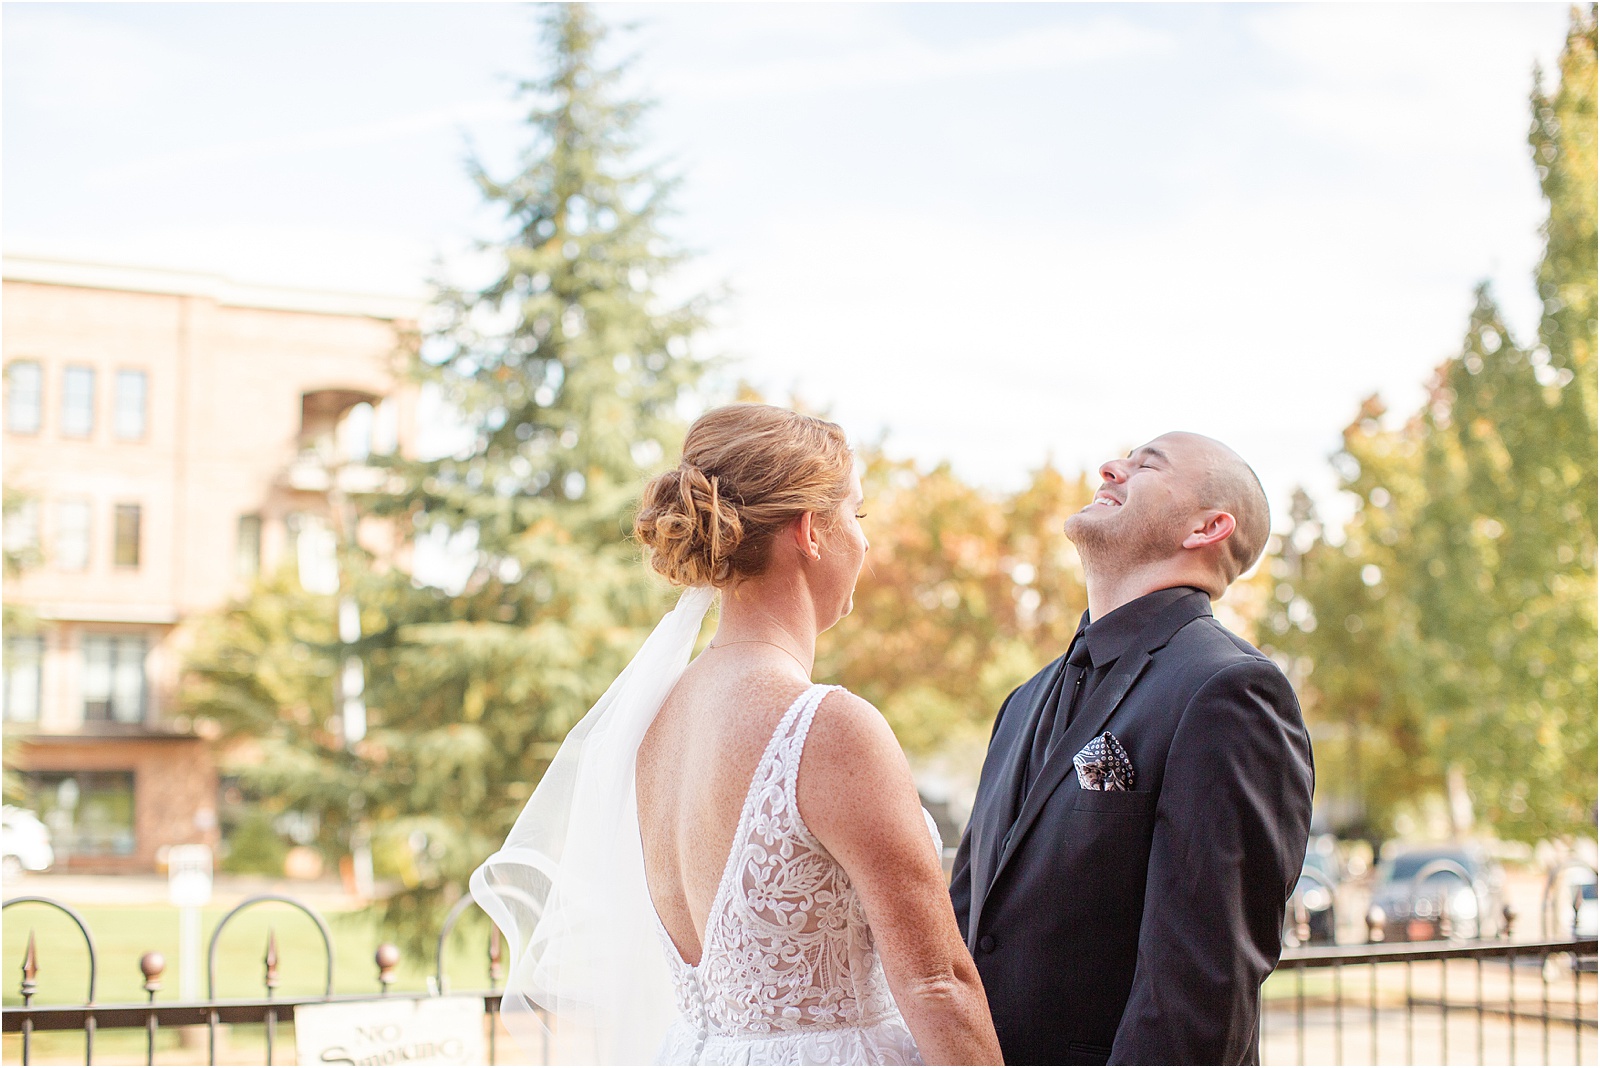 groom laughs with bride during their first look before wedding ceremony